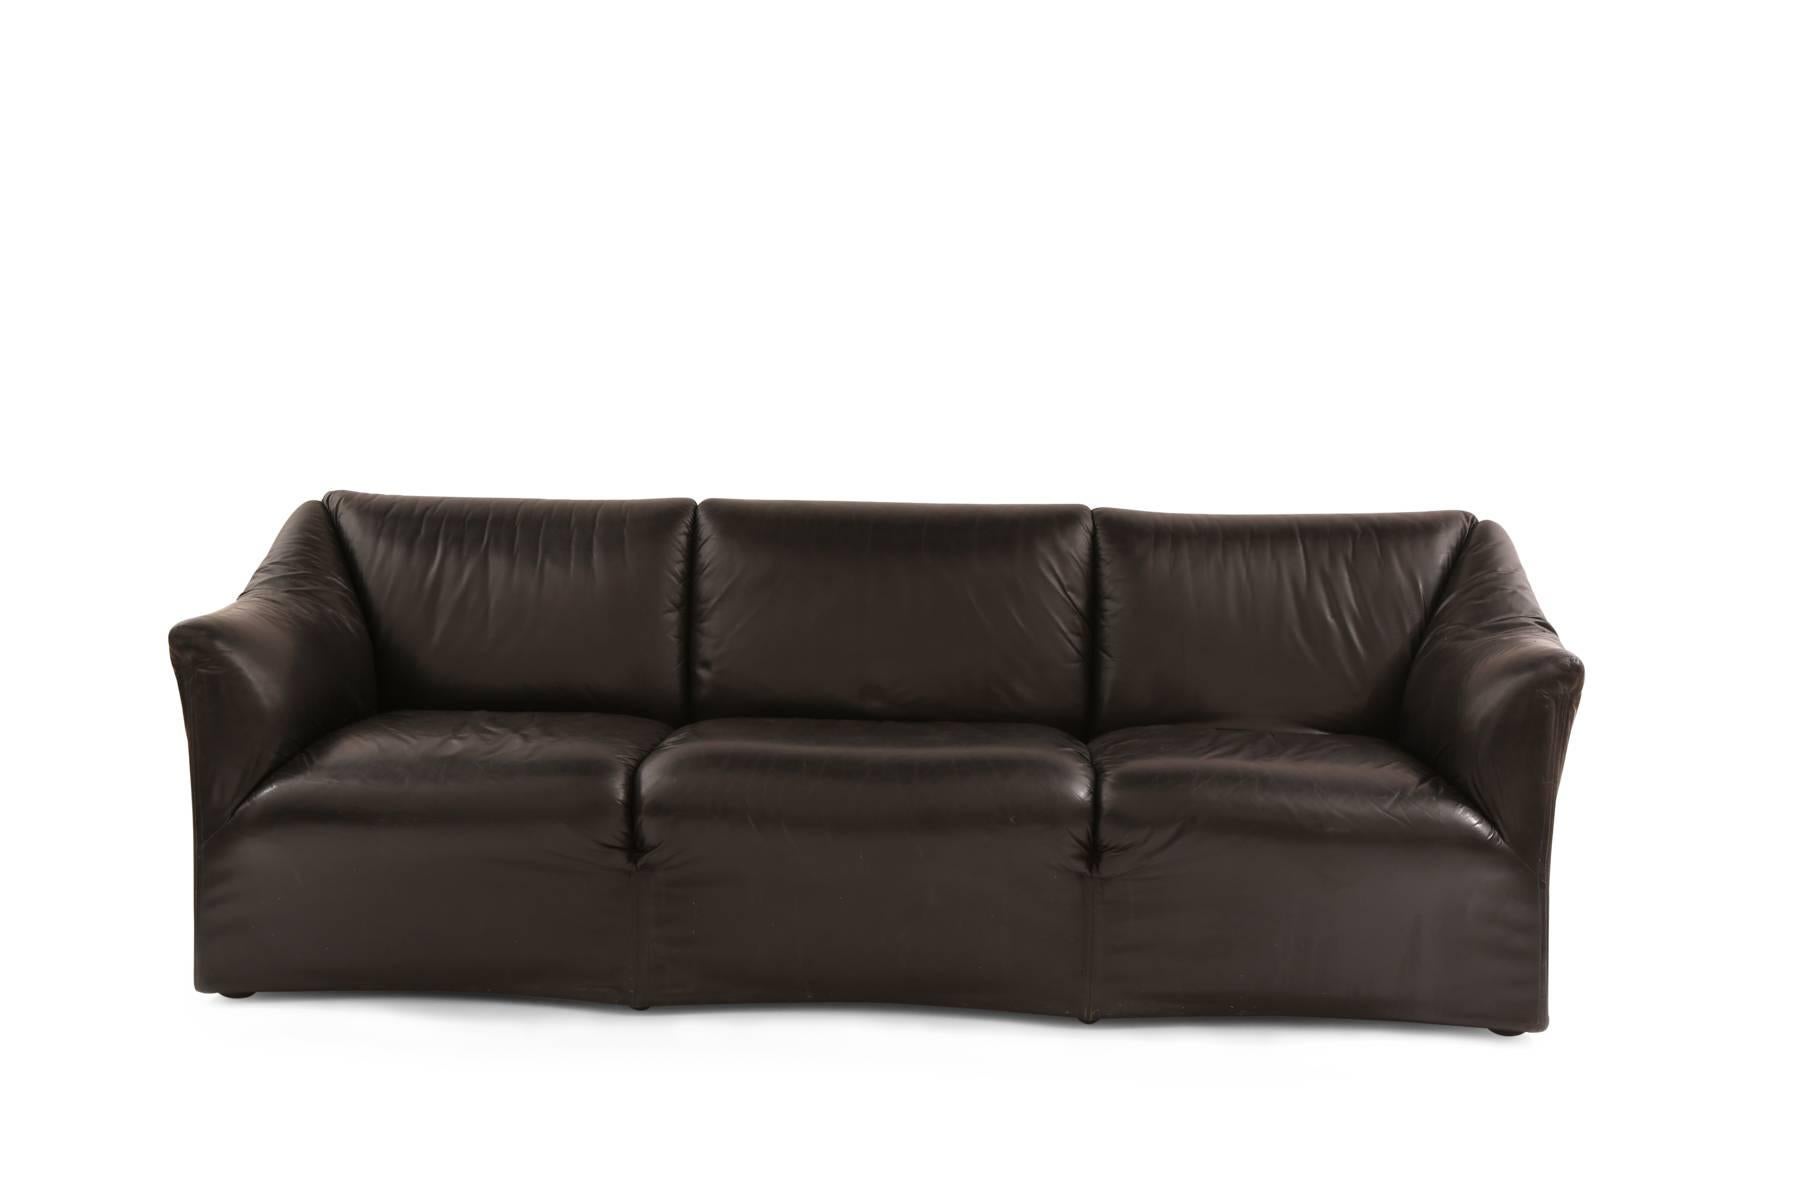 Mario Bellini for Cassina 'Tentazione' sofa circa mid-1970s. This all original example has a sculptural wavy front and back and tapered arms. It is upholstered in its original supple black leather.